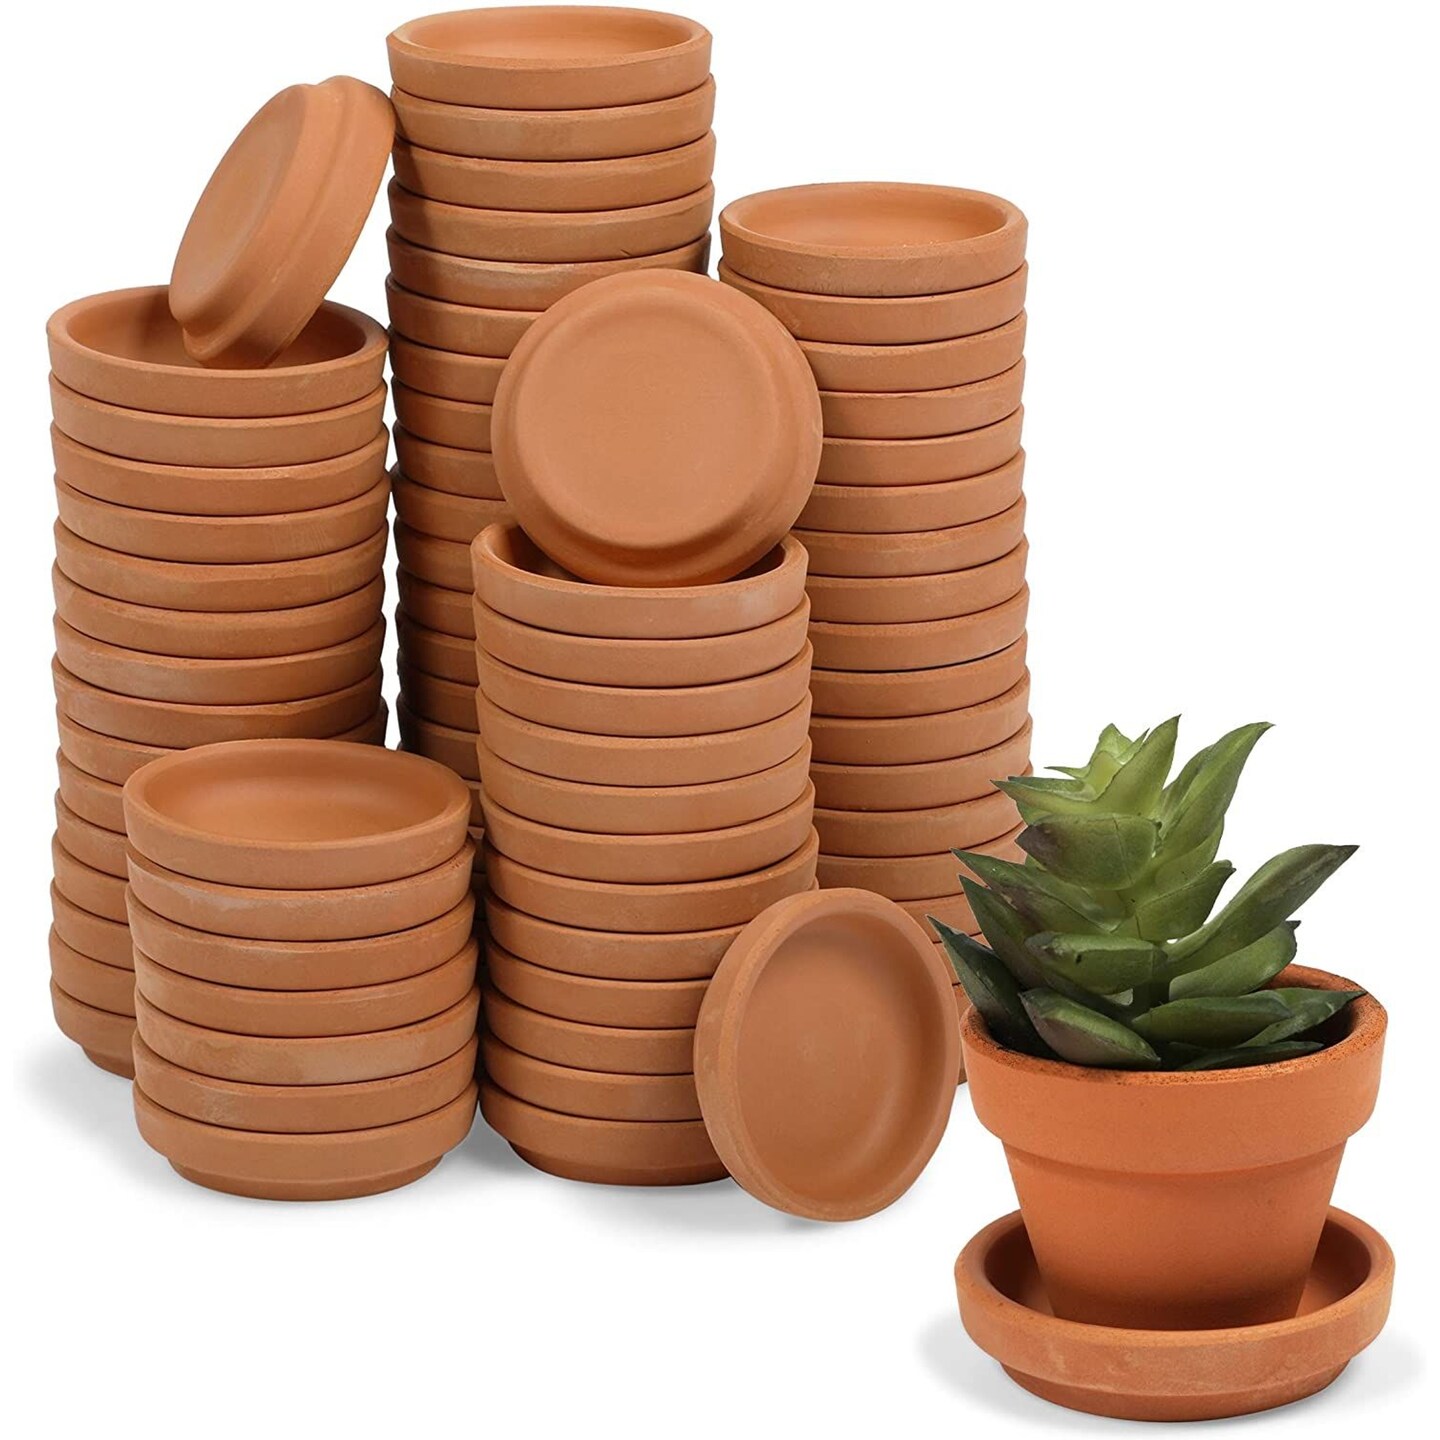 80 Pack 2 Inch Terracotta Saucers for Plant Pots, Plates for Indoor and Outdoor Planter